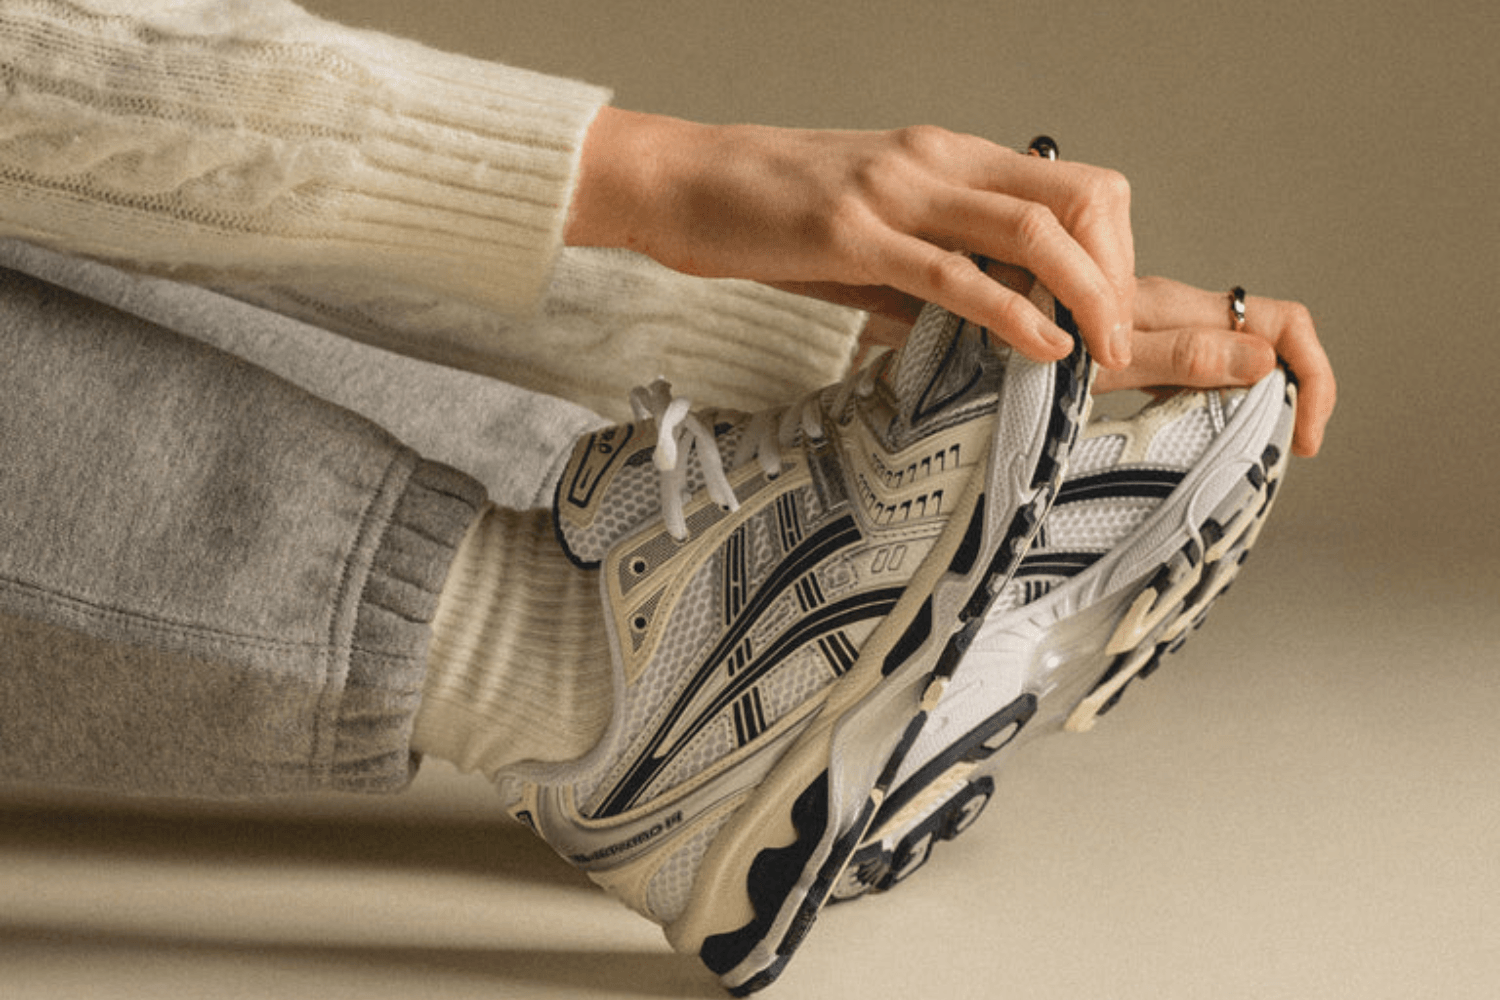 Know your size: ASICS sizing guide